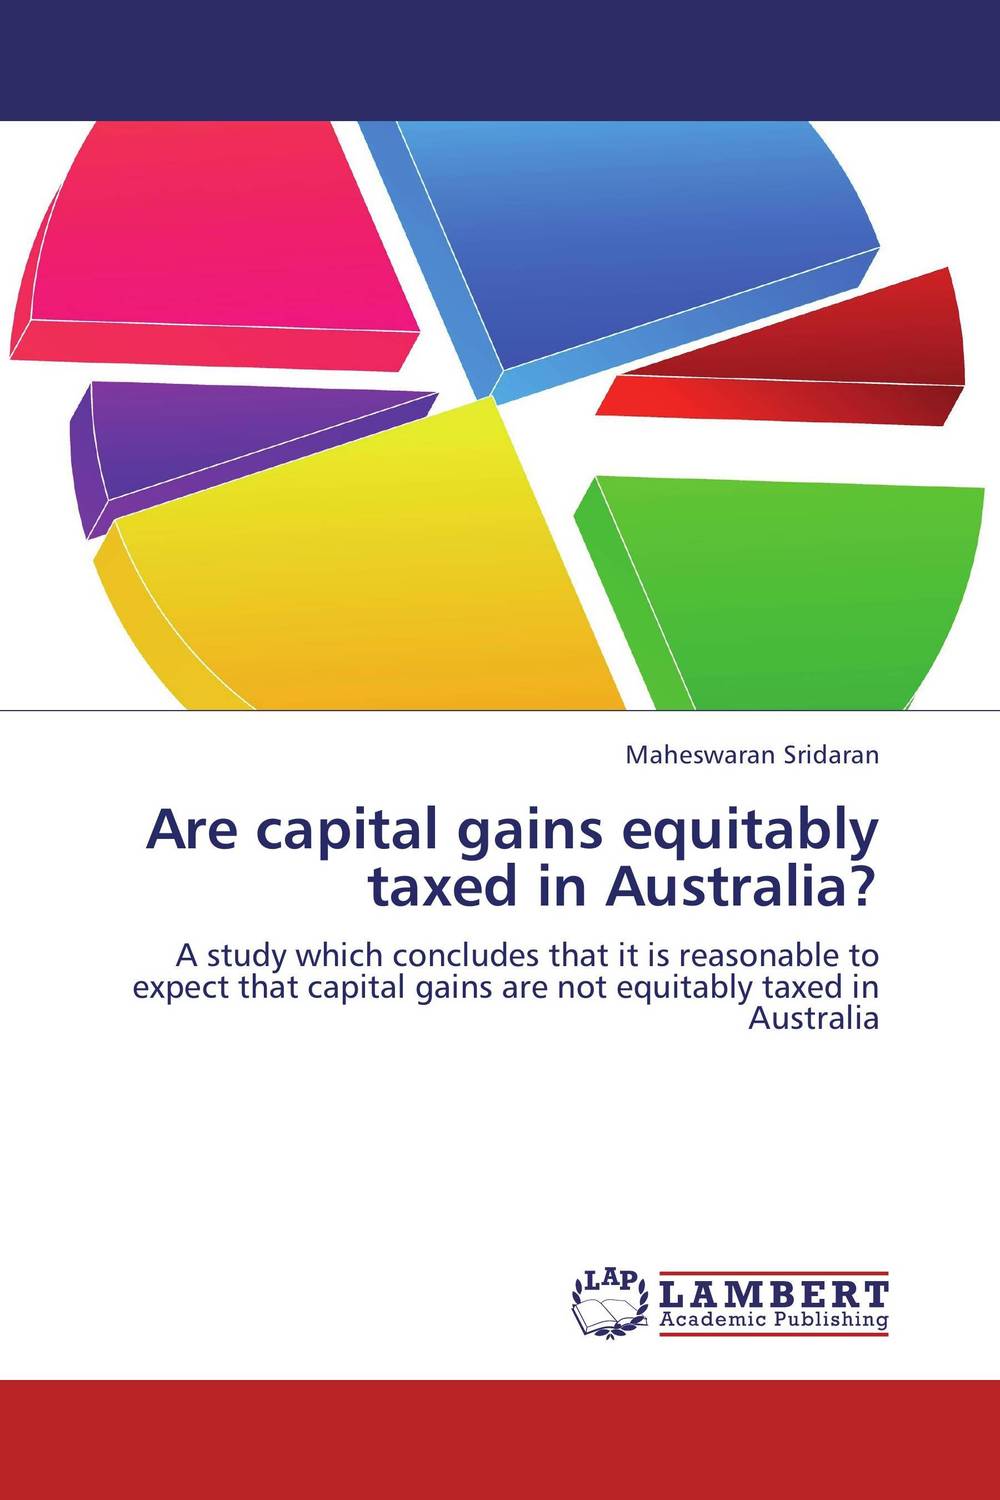 Are capital gains equitably taxed in Australia?